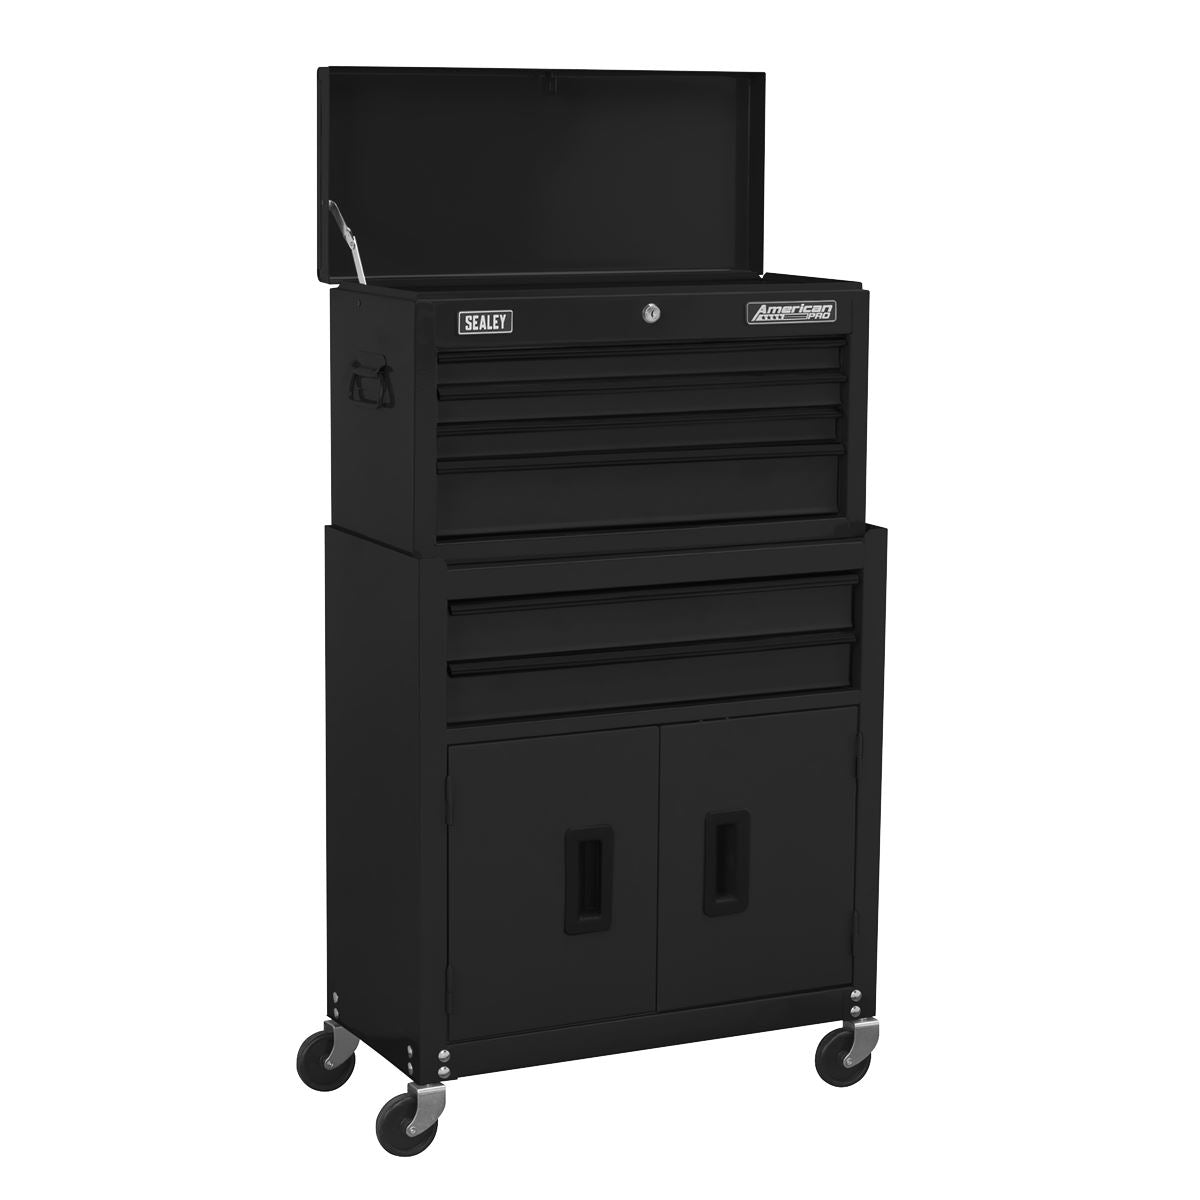 Sealey American Pro Topchest & Rollcab Combination 6 Drawer with Ball-Bearing Slides - Black